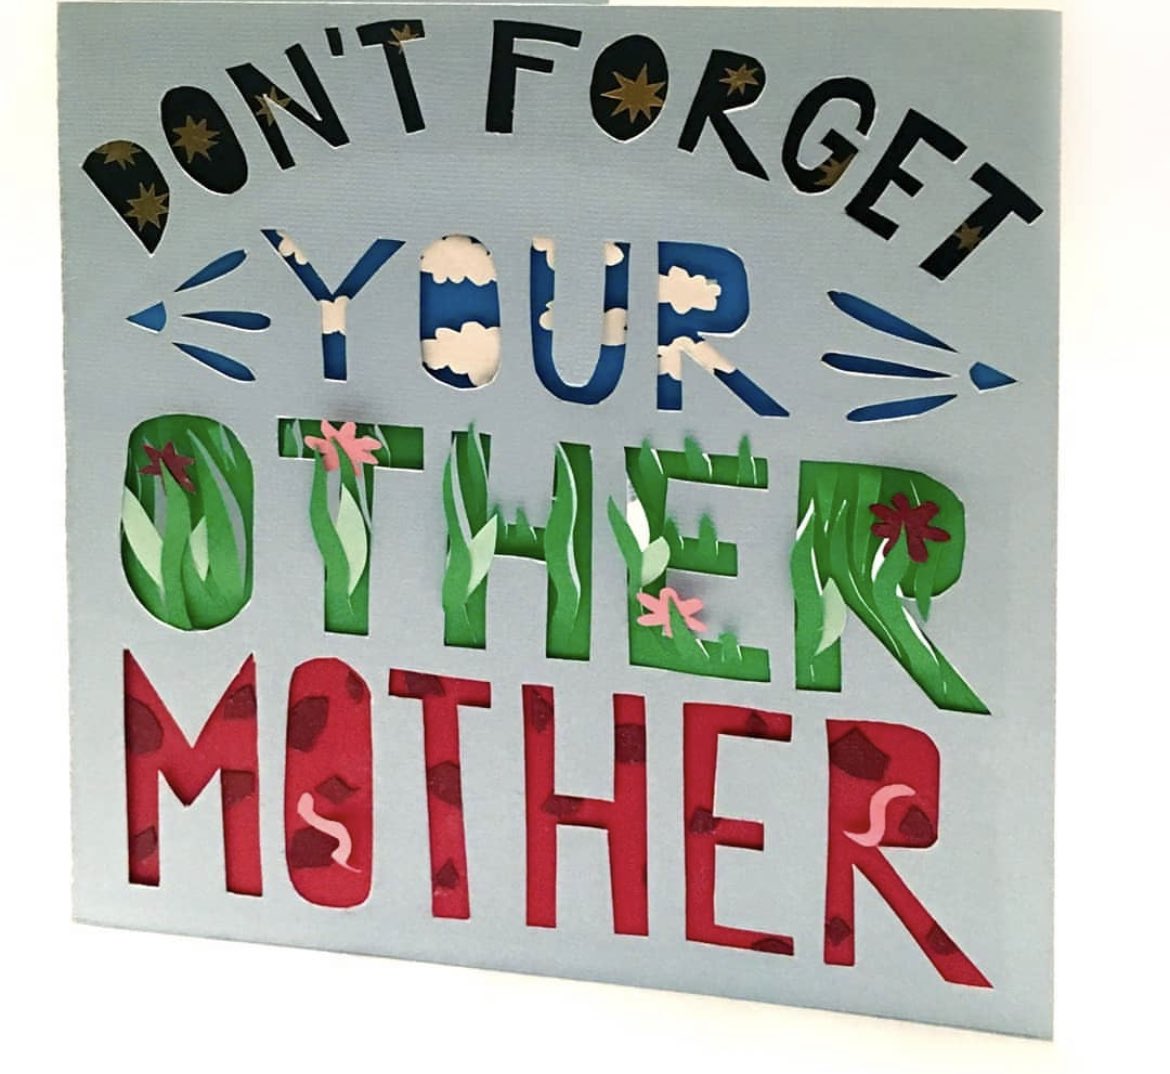 Don't forget Mother Earth this Mother's Day. Now more than ever we need to look after each other & our one home for our children & future generations. 
#climateart #climatechange #noplanetb #mothersday #environment #sustainability #ecomum #greenmum #greenfuture #parentsforfuture